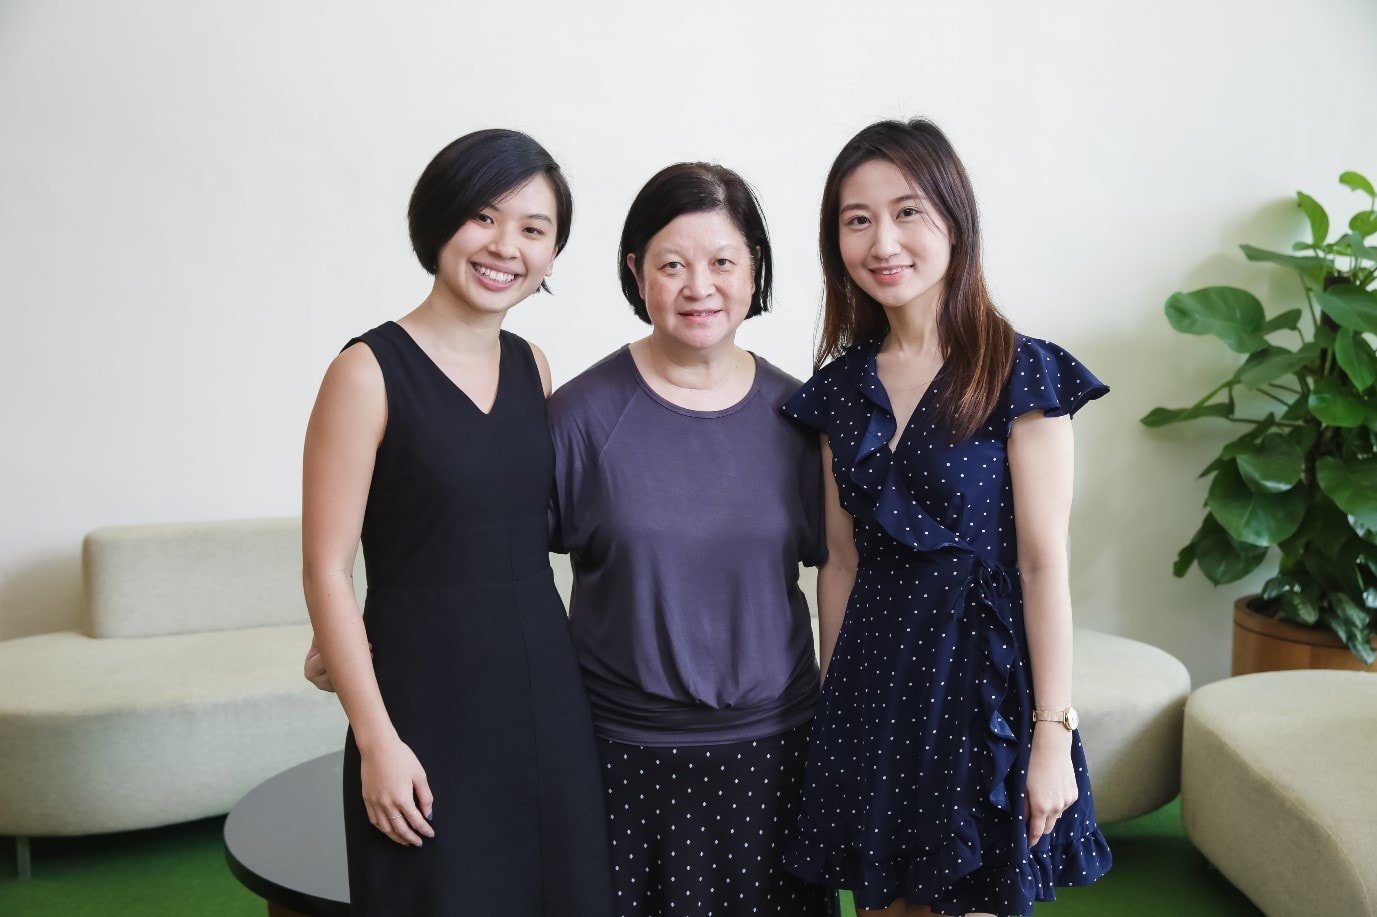 Category 2 Winners for 2019 
First row from left to right: Seah Huaikuan, Margaret Soh Lai Mooi (Special Award), Low Wan Qing  
